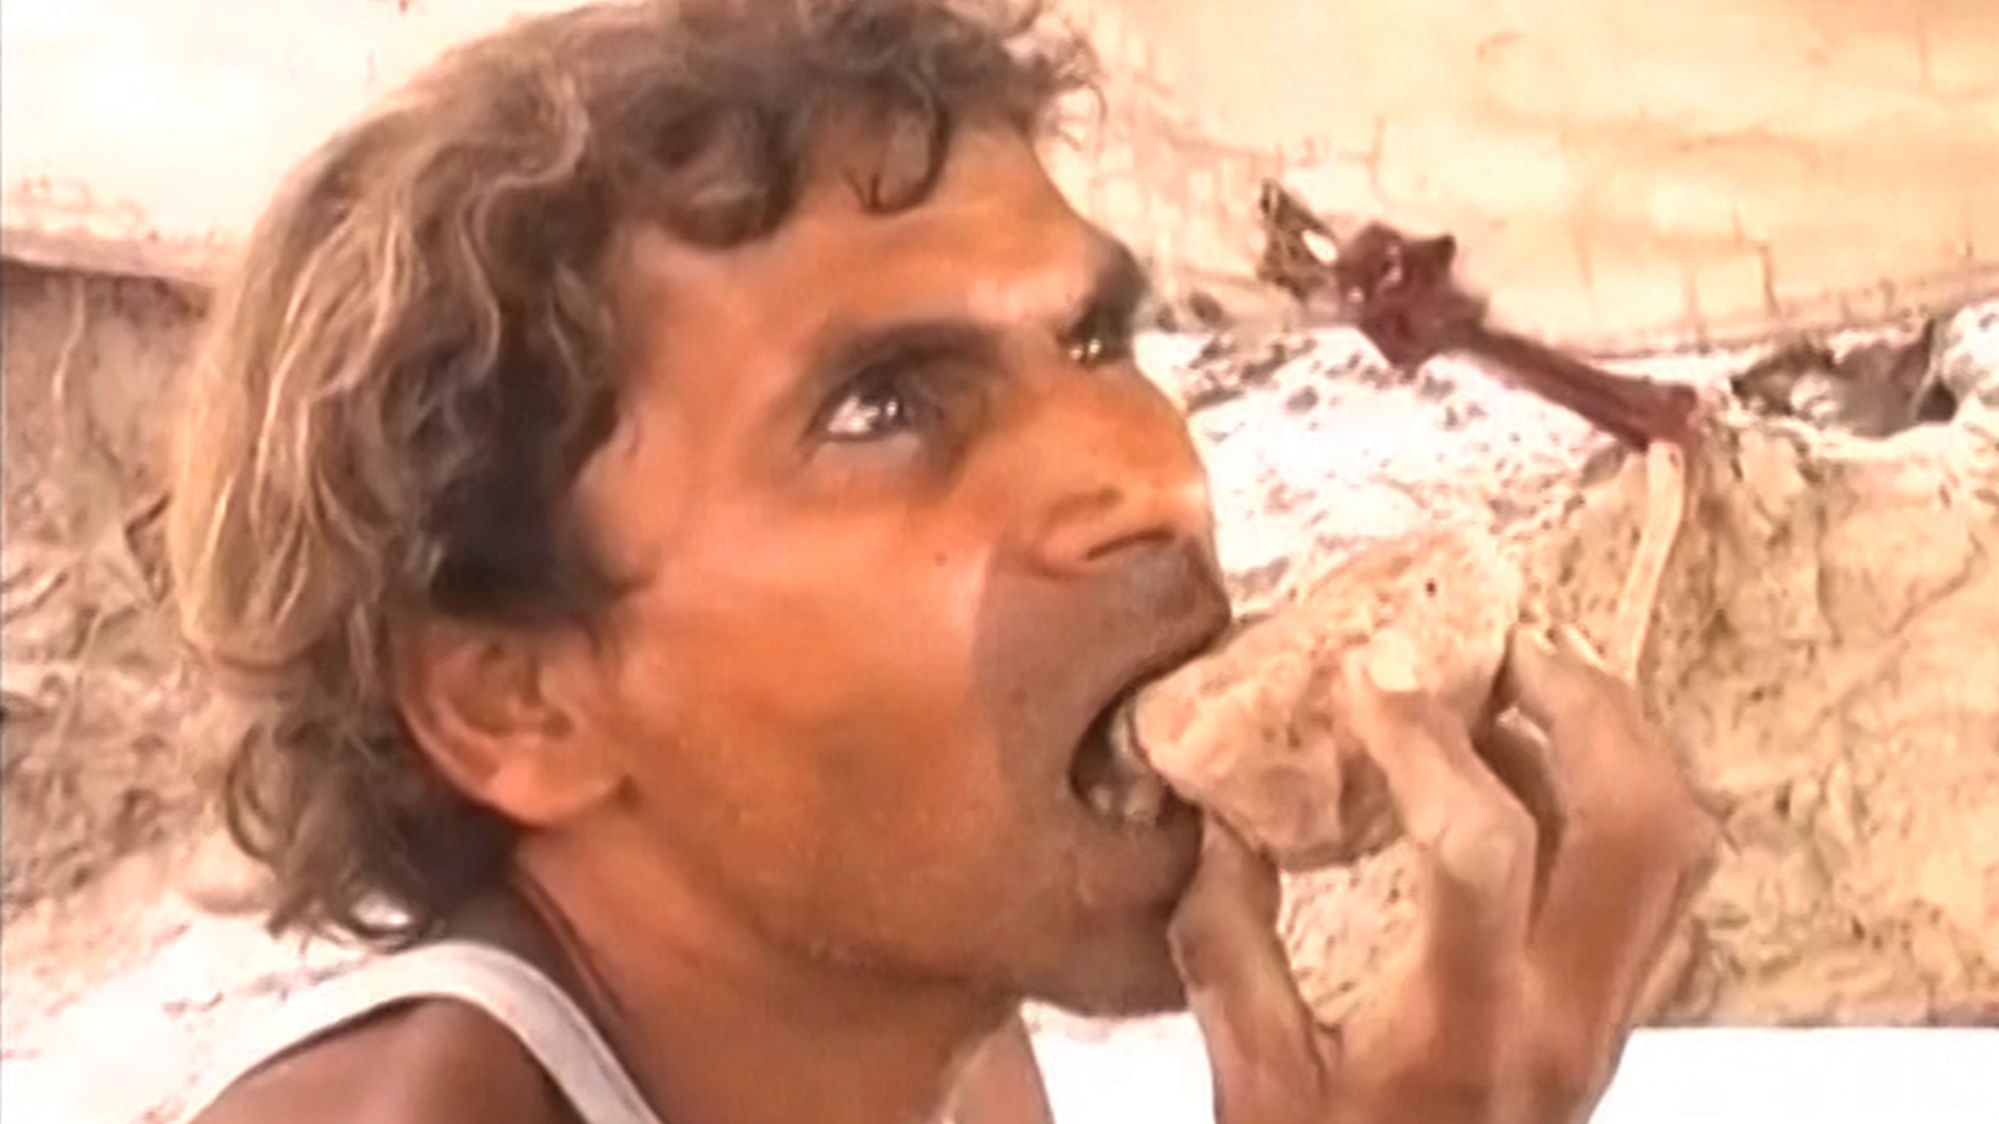 Rameshwar from Haridwar, Uttarakhand is somewhat of a local celebrity because of his habit of eating mud and stones. (Photo: ANI Screengrab)